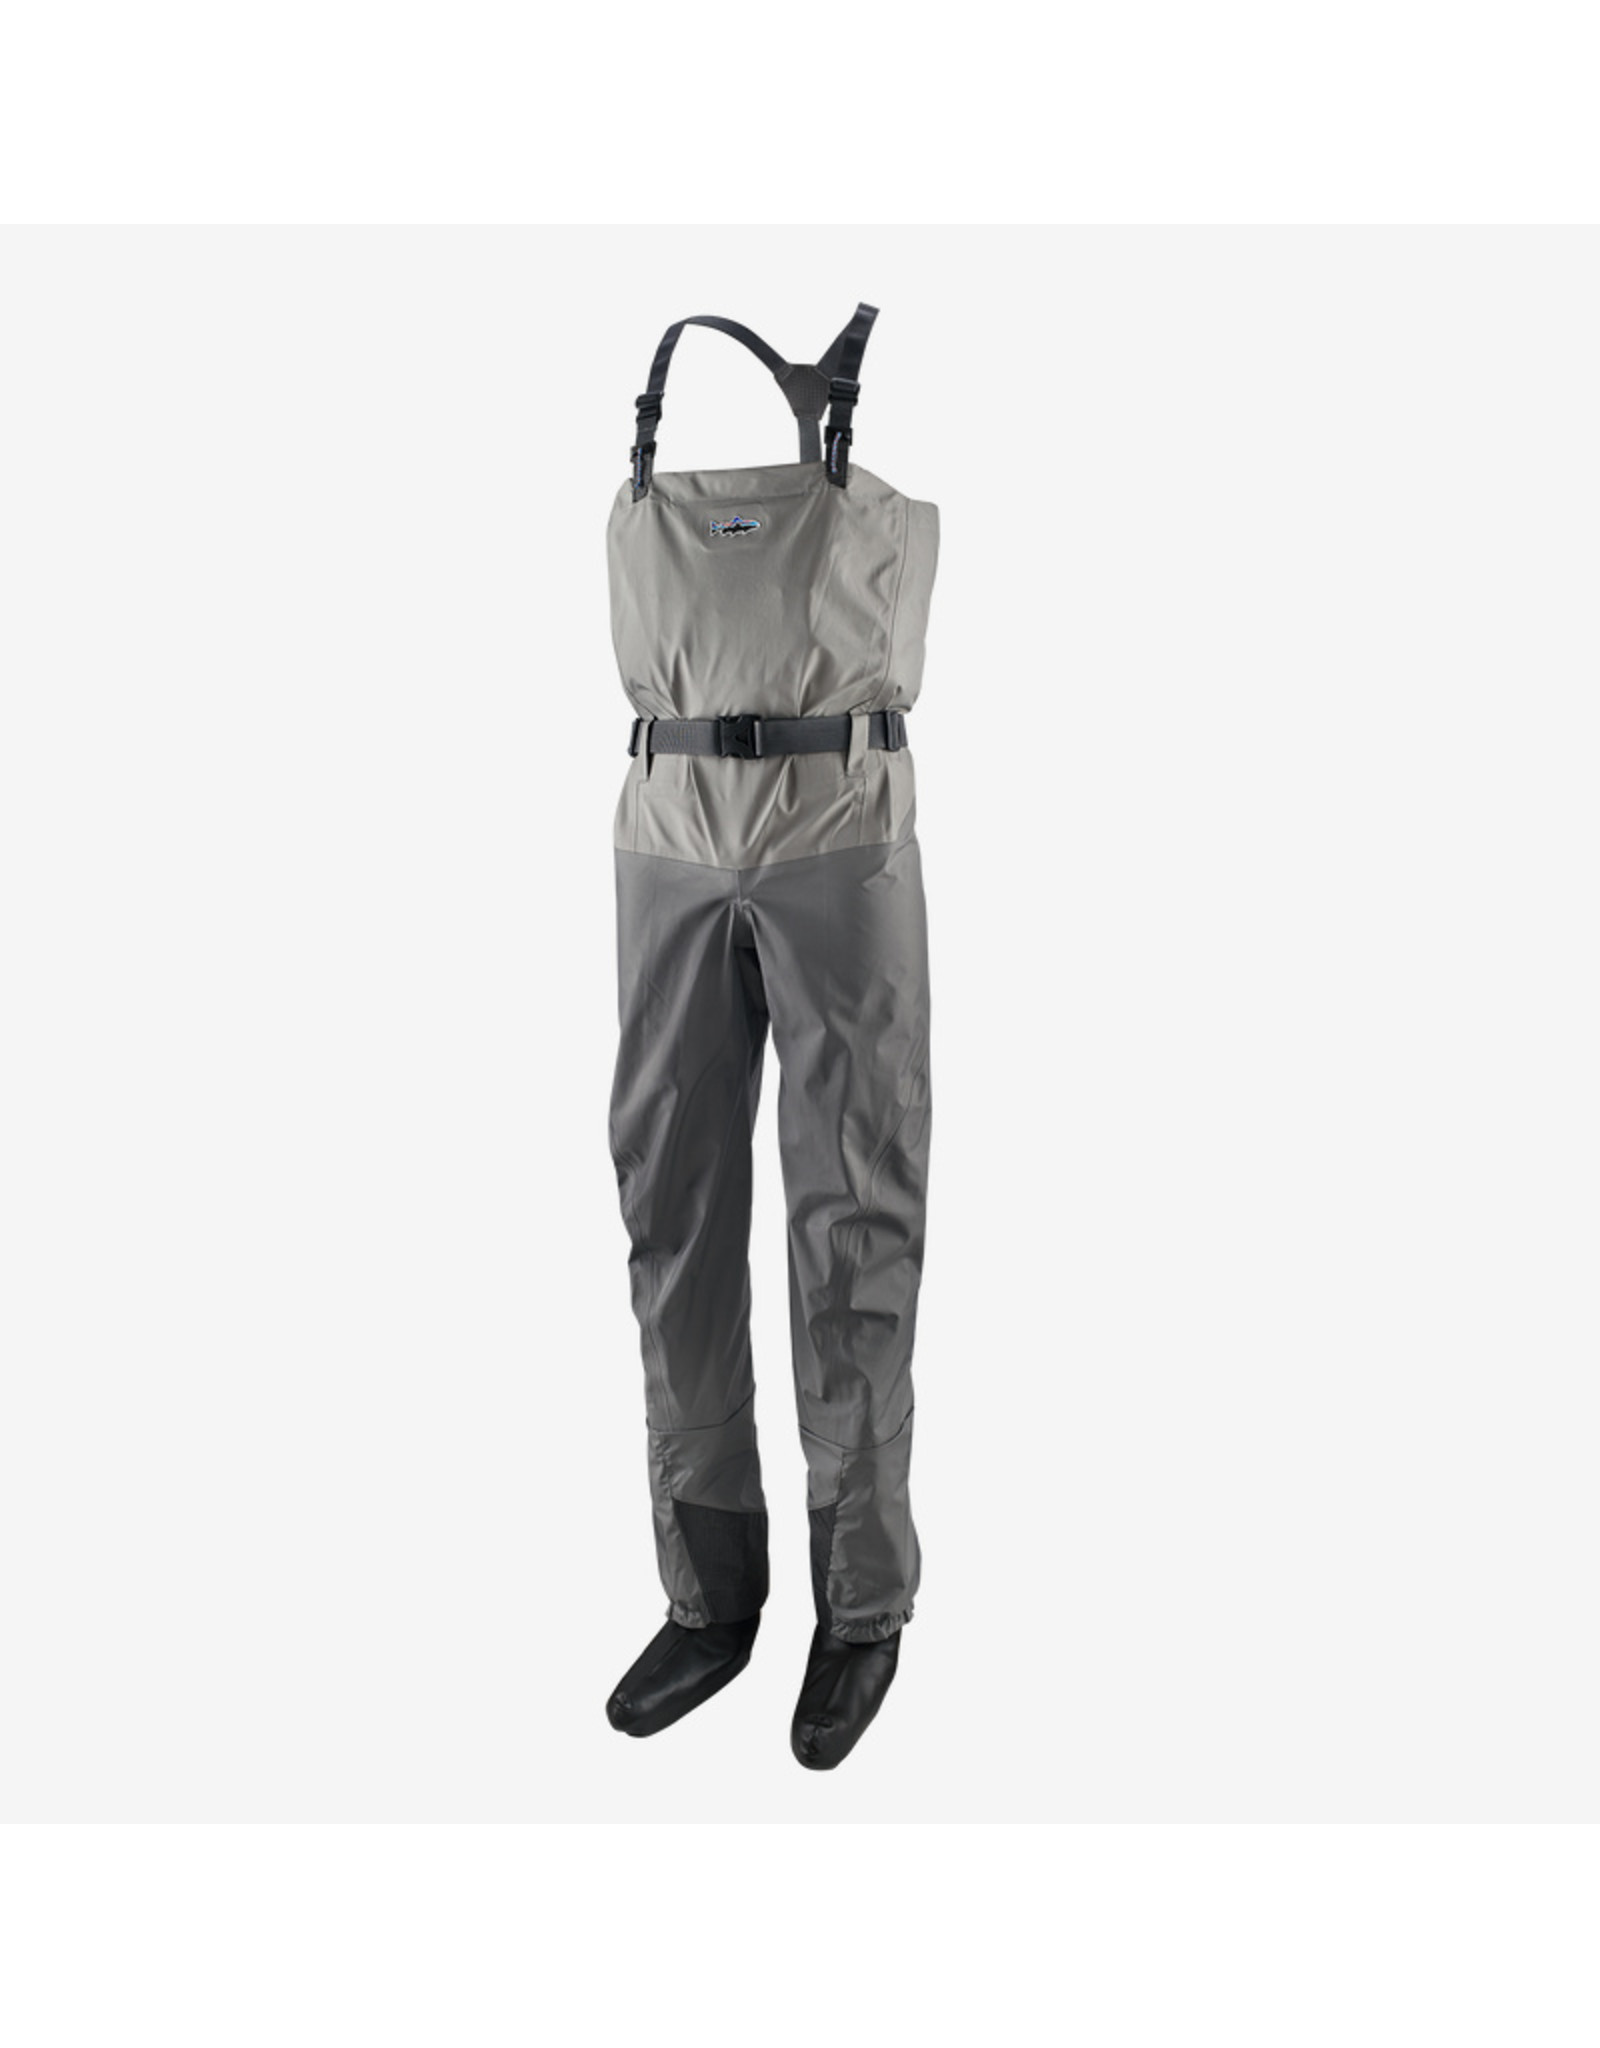 Patagonia Patagonia - Men's Swiftcurrent Packable Waders (Clearance)